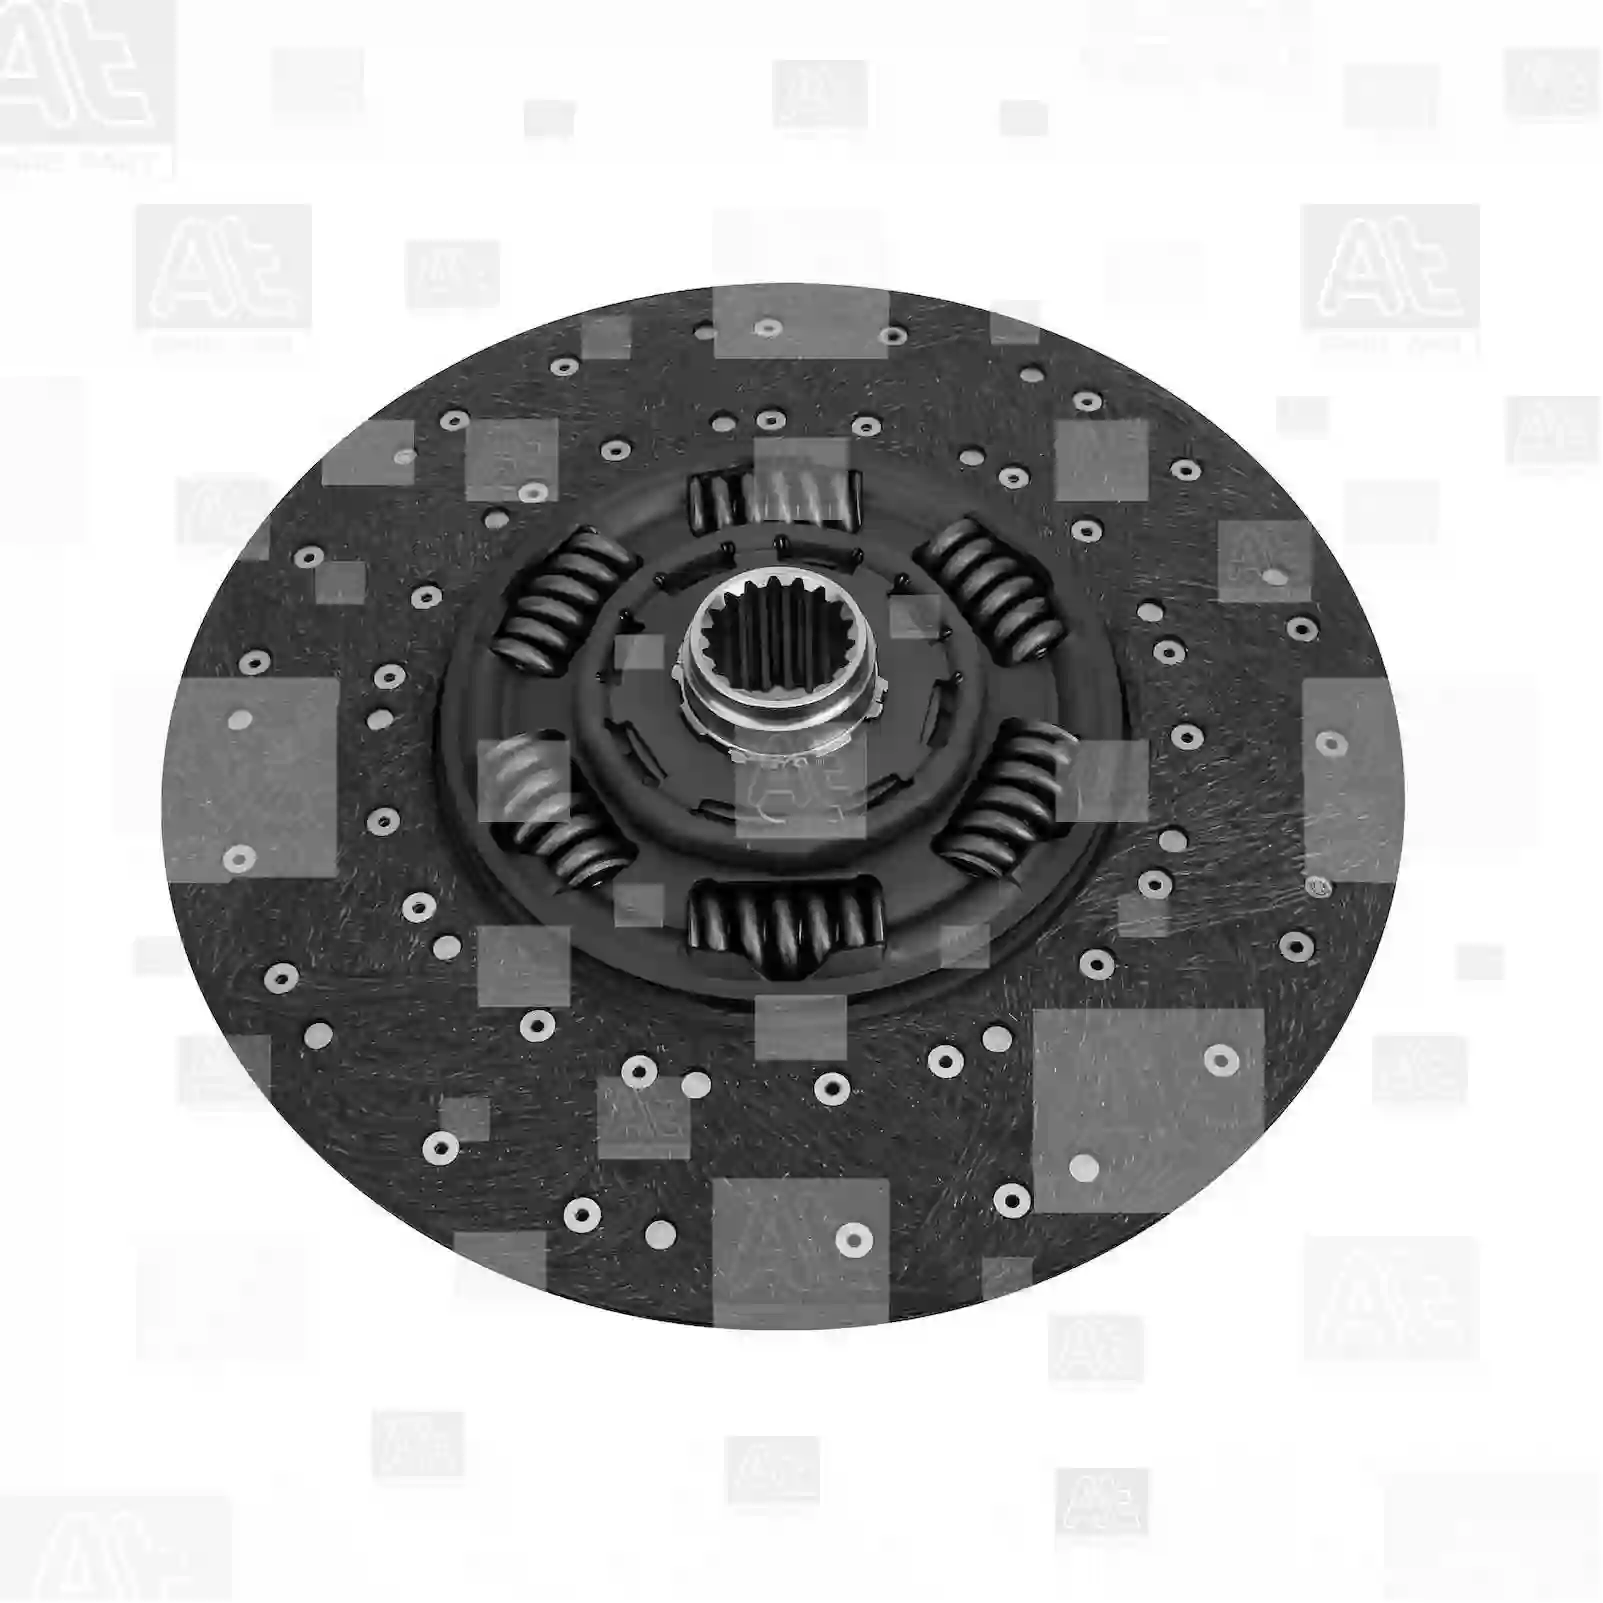 Clutch disc, 77722461, 0152509803, 0152509903, 0162500003, 0162500103, 0162500303, 0162500403, 0162500503, 0172506703, 0172506803, 0172506903, 0192505503, 019250550380, 0192505603, 0192505803, 019250580380, 0192506903, 0202501903, 020250190380, 0202504403, 020250440380, 0202504603, 020250460380, 0202508903, 020250890380, 0212503703, 0212503803, 0212508903, 0212509303, 0252504603, 0252504703, 0262501103, 0262501203 ||  77722461 At Spare Part | Engine, Accelerator Pedal, Camshaft, Connecting Rod, Crankcase, Crankshaft, Cylinder Head, Engine Suspension Mountings, Exhaust Manifold, Exhaust Gas Recirculation, Filter Kits, Flywheel Housing, General Overhaul Kits, Engine, Intake Manifold, Oil Cleaner, Oil Cooler, Oil Filter, Oil Pump, Oil Sump, Piston & Liner, Sensor & Switch, Timing Case, Turbocharger, Cooling System, Belt Tensioner, Coolant Filter, Coolant Pipe, Corrosion Prevention Agent, Drive, Expansion Tank, Fan, Intercooler, Monitors & Gauges, Radiator, Thermostat, V-Belt / Timing belt, Water Pump, Fuel System, Electronical Injector Unit, Feed Pump, Fuel Filter, cpl., Fuel Gauge Sender,  Fuel Line, Fuel Pump, Fuel Tank, Injection Line Kit, Injection Pump, Exhaust System, Clutch & Pedal, Gearbox, Propeller Shaft, Axles, Brake System, Hubs & Wheels, Suspension, Leaf Spring, Universal Parts / Accessories, Steering, Electrical System, Cabin Clutch disc, 77722461, 0152509803, 0152509903, 0162500003, 0162500103, 0162500303, 0162500403, 0162500503, 0172506703, 0172506803, 0172506903, 0192505503, 019250550380, 0192505603, 0192505803, 019250580380, 0192506903, 0202501903, 020250190380, 0202504403, 020250440380, 0202504603, 020250460380, 0202508903, 020250890380, 0212503703, 0212503803, 0212508903, 0212509303, 0252504603, 0252504703, 0262501103, 0262501203 ||  77722461 At Spare Part | Engine, Accelerator Pedal, Camshaft, Connecting Rod, Crankcase, Crankshaft, Cylinder Head, Engine Suspension Mountings, Exhaust Manifold, Exhaust Gas Recirculation, Filter Kits, Flywheel Housing, General Overhaul Kits, Engine, Intake Manifold, Oil Cleaner, Oil Cooler, Oil Filter, Oil Pump, Oil Sump, Piston & Liner, Sensor & Switch, Timing Case, Turbocharger, Cooling System, Belt Tensioner, Coolant Filter, Coolant Pipe, Corrosion Prevention Agent, Drive, Expansion Tank, Fan, Intercooler, Monitors & Gauges, Radiator, Thermostat, V-Belt / Timing belt, Water Pump, Fuel System, Electronical Injector Unit, Feed Pump, Fuel Filter, cpl., Fuel Gauge Sender,  Fuel Line, Fuel Pump, Fuel Tank, Injection Line Kit, Injection Pump, Exhaust System, Clutch & Pedal, Gearbox, Propeller Shaft, Axles, Brake System, Hubs & Wheels, Suspension, Leaf Spring, Universal Parts / Accessories, Steering, Electrical System, Cabin